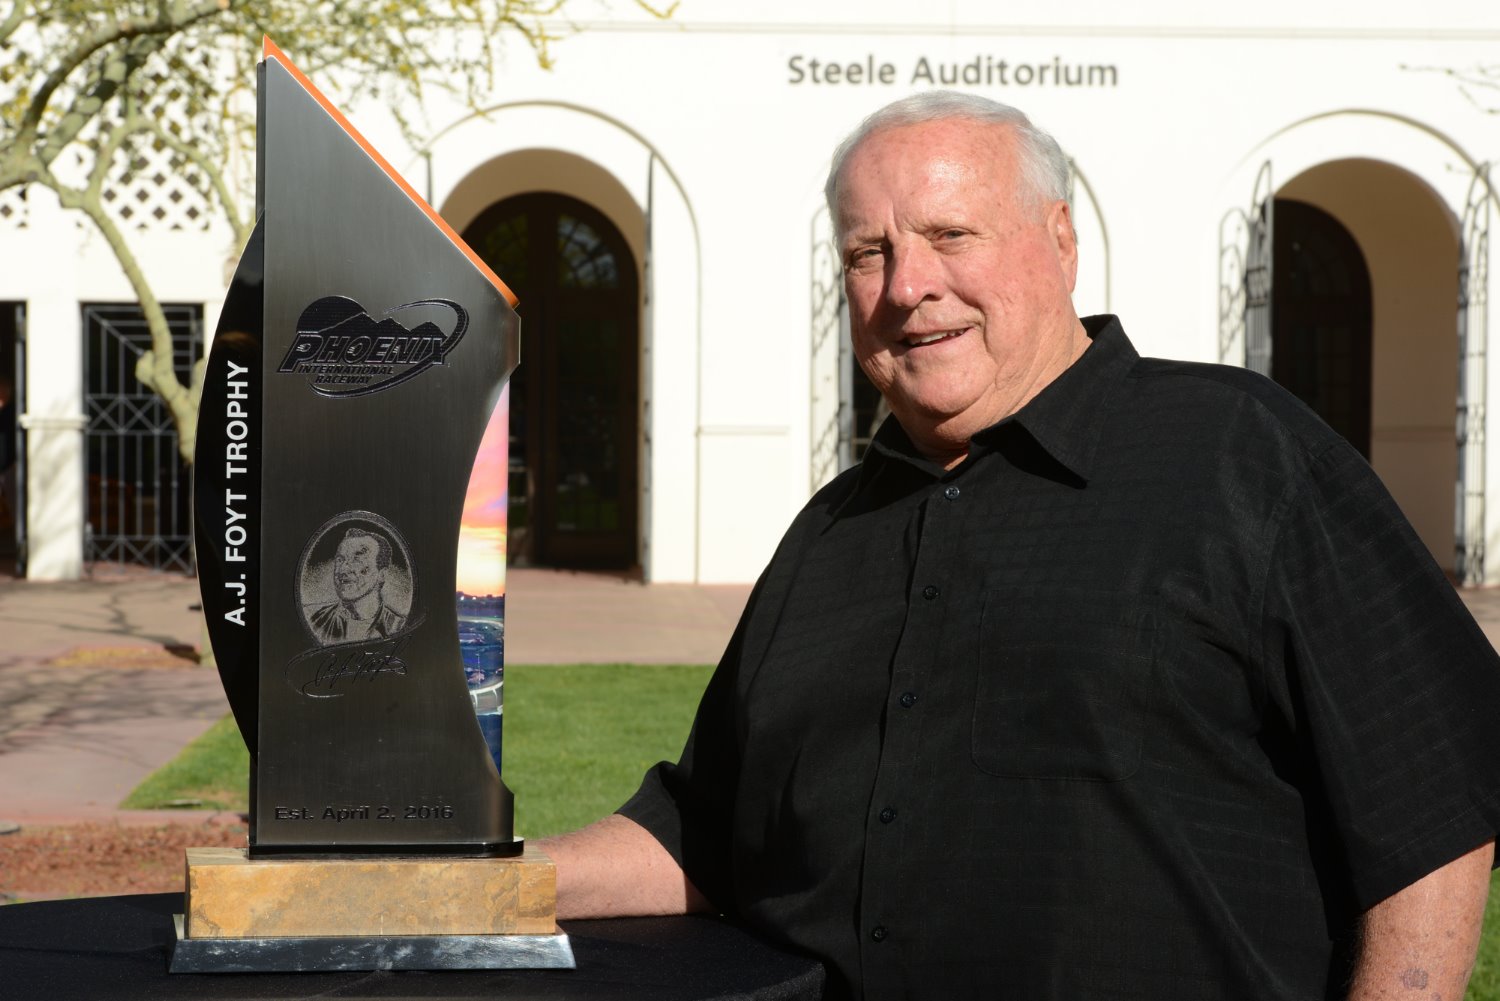 A.J. Foyt poses with the A.J Foyt Champions trophy in front of the Heard Museum in downtown Phoenix